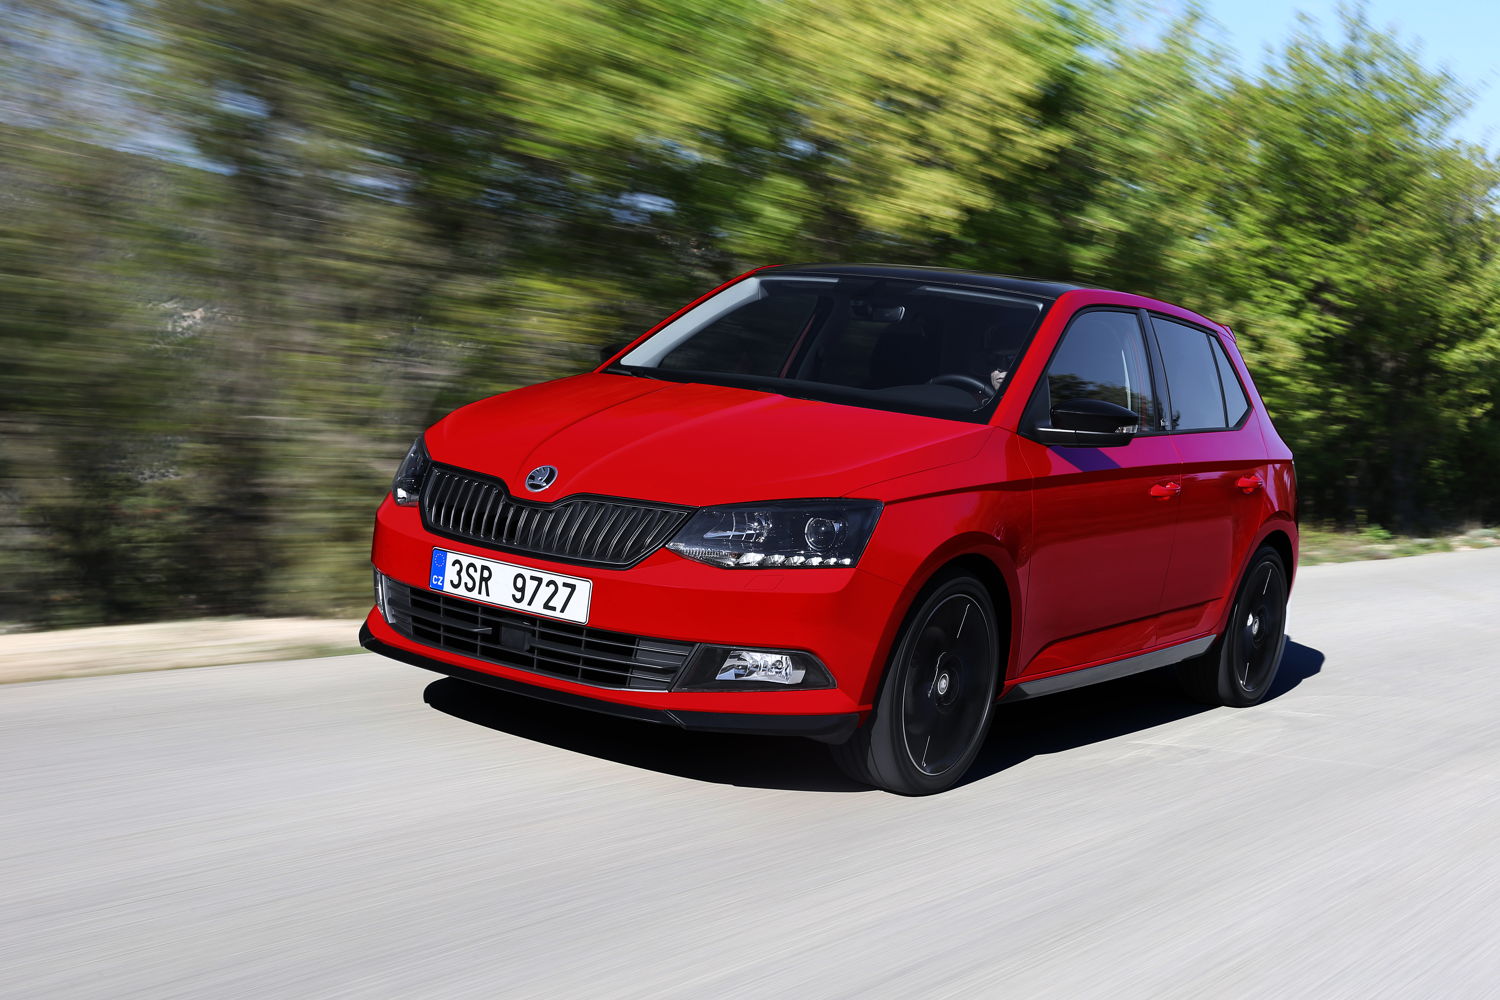 The third generation of the ŠKODA FABIA impresses with a dynamic and emotive design, a large amount of interior space as well as innovative safety, comfort and infotainment systems. A new three-cylinder-engine is available with two different power outputs.